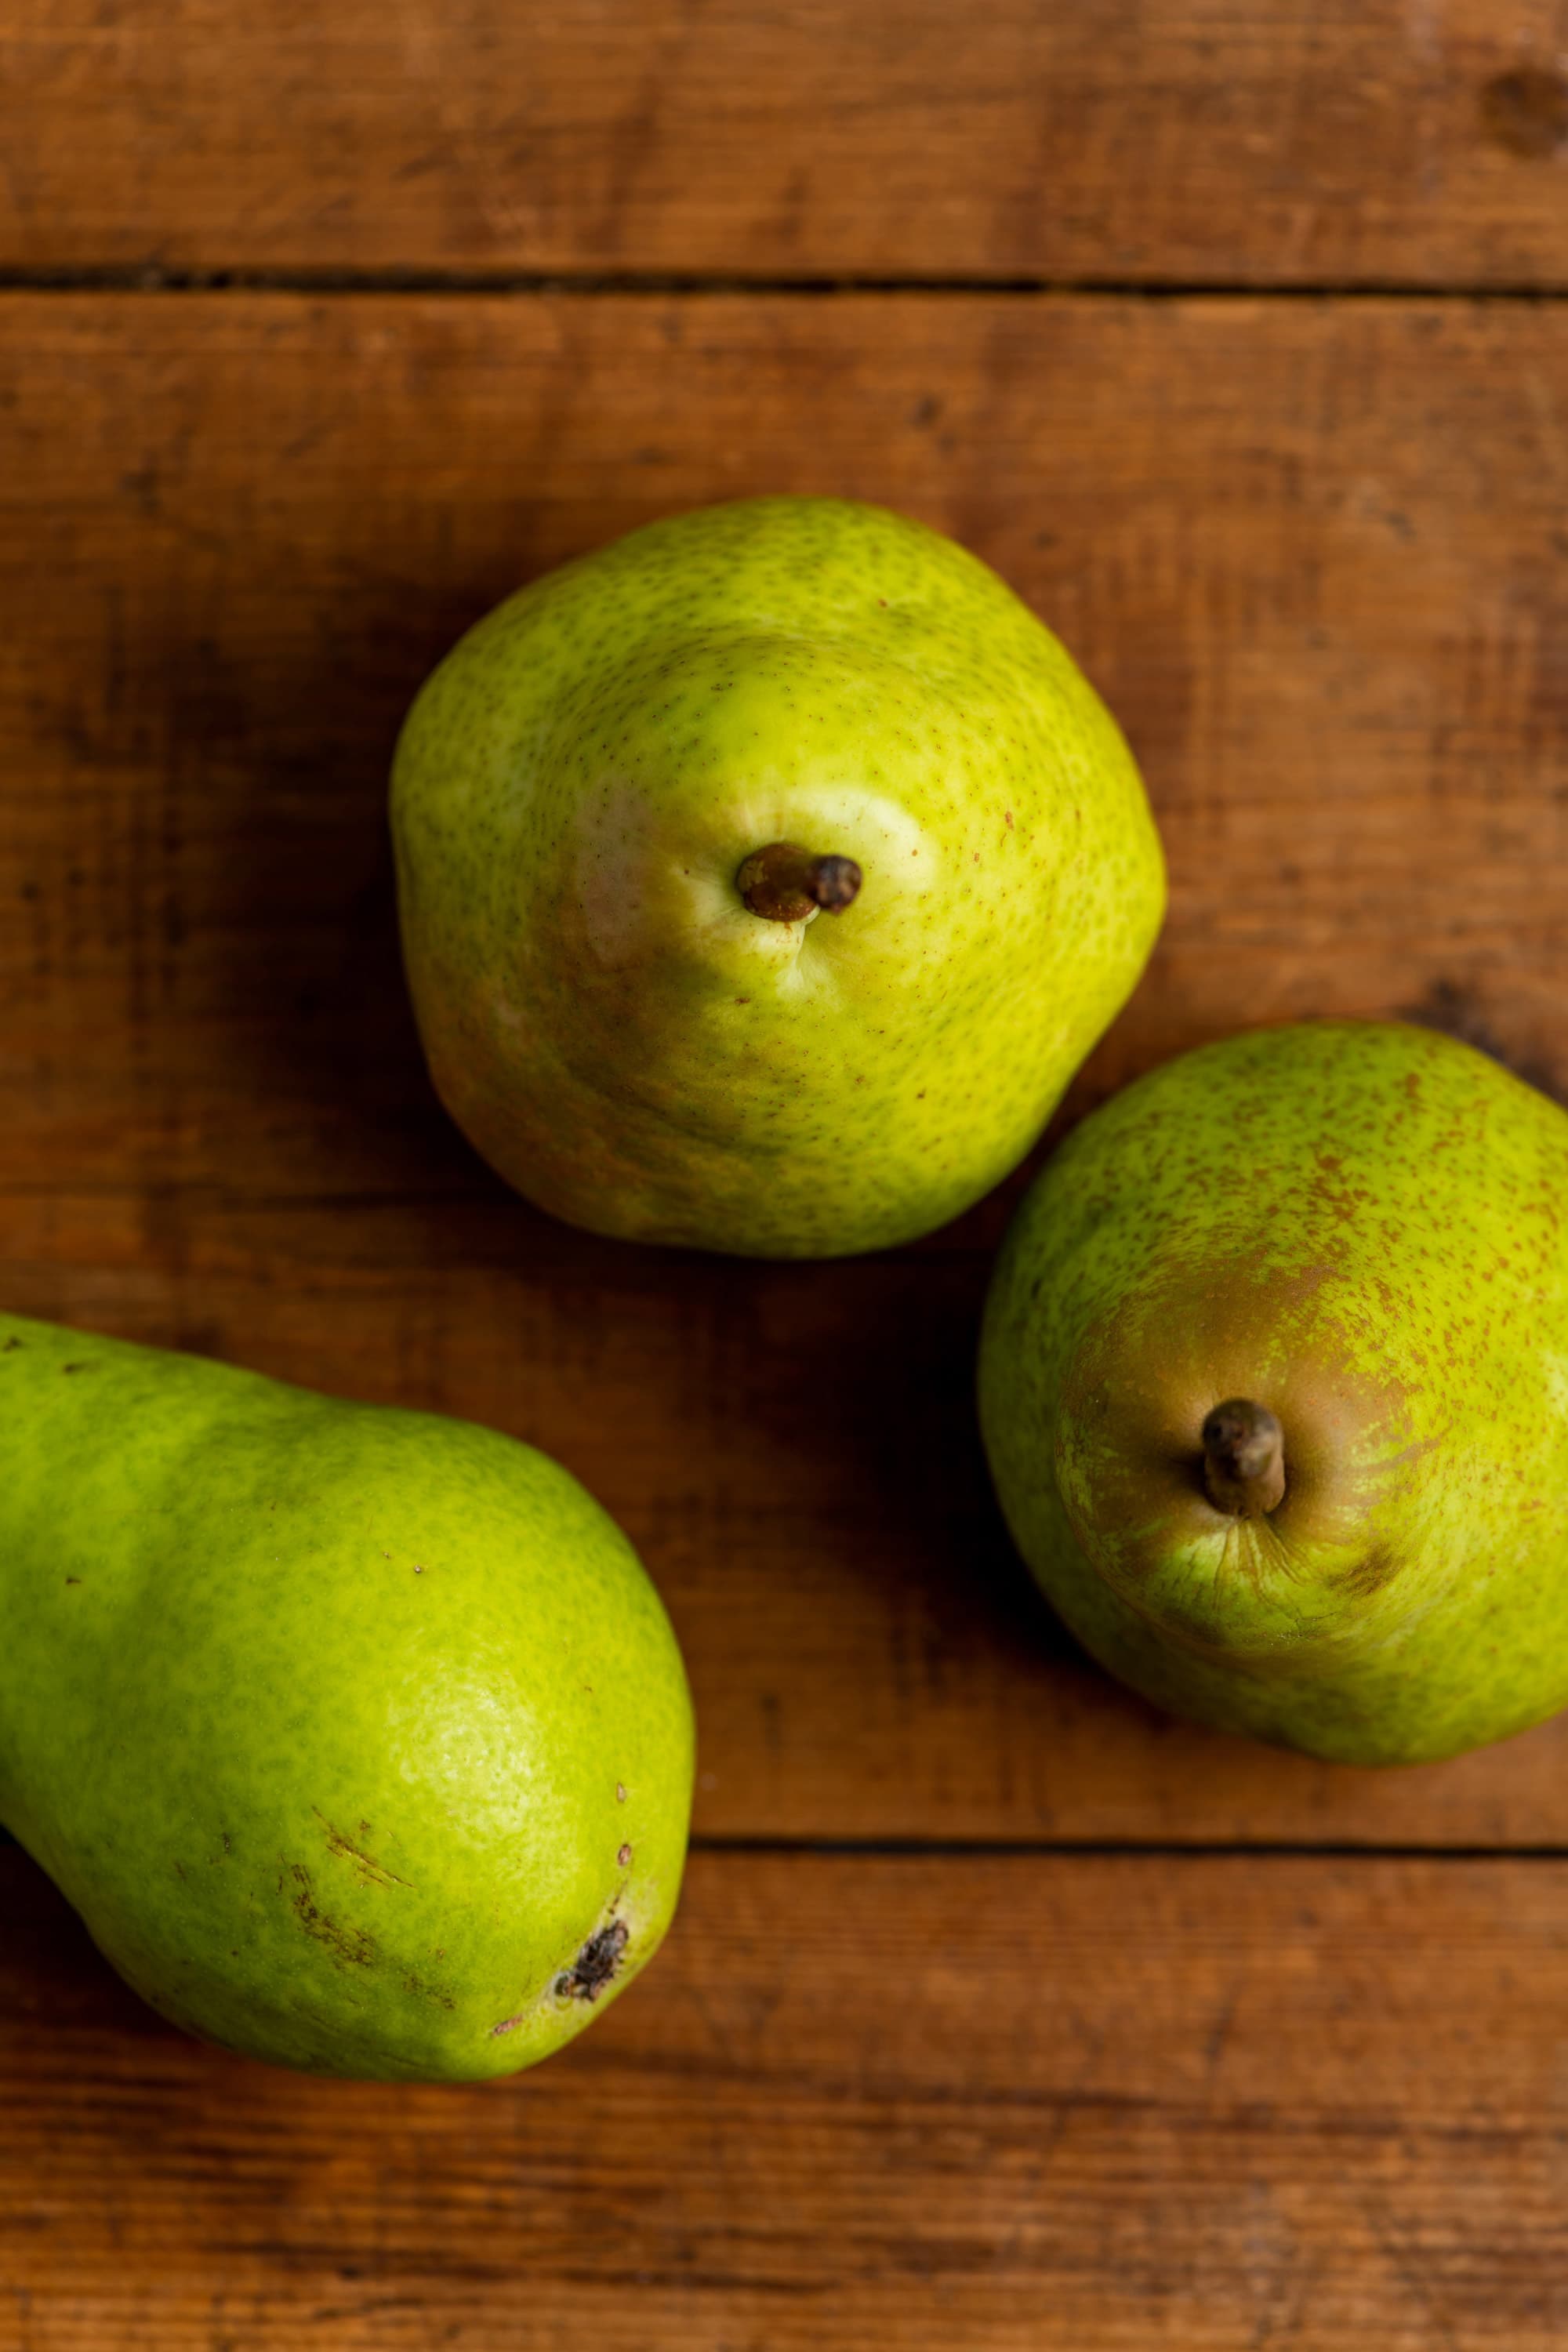 Pears on a wooden surface.